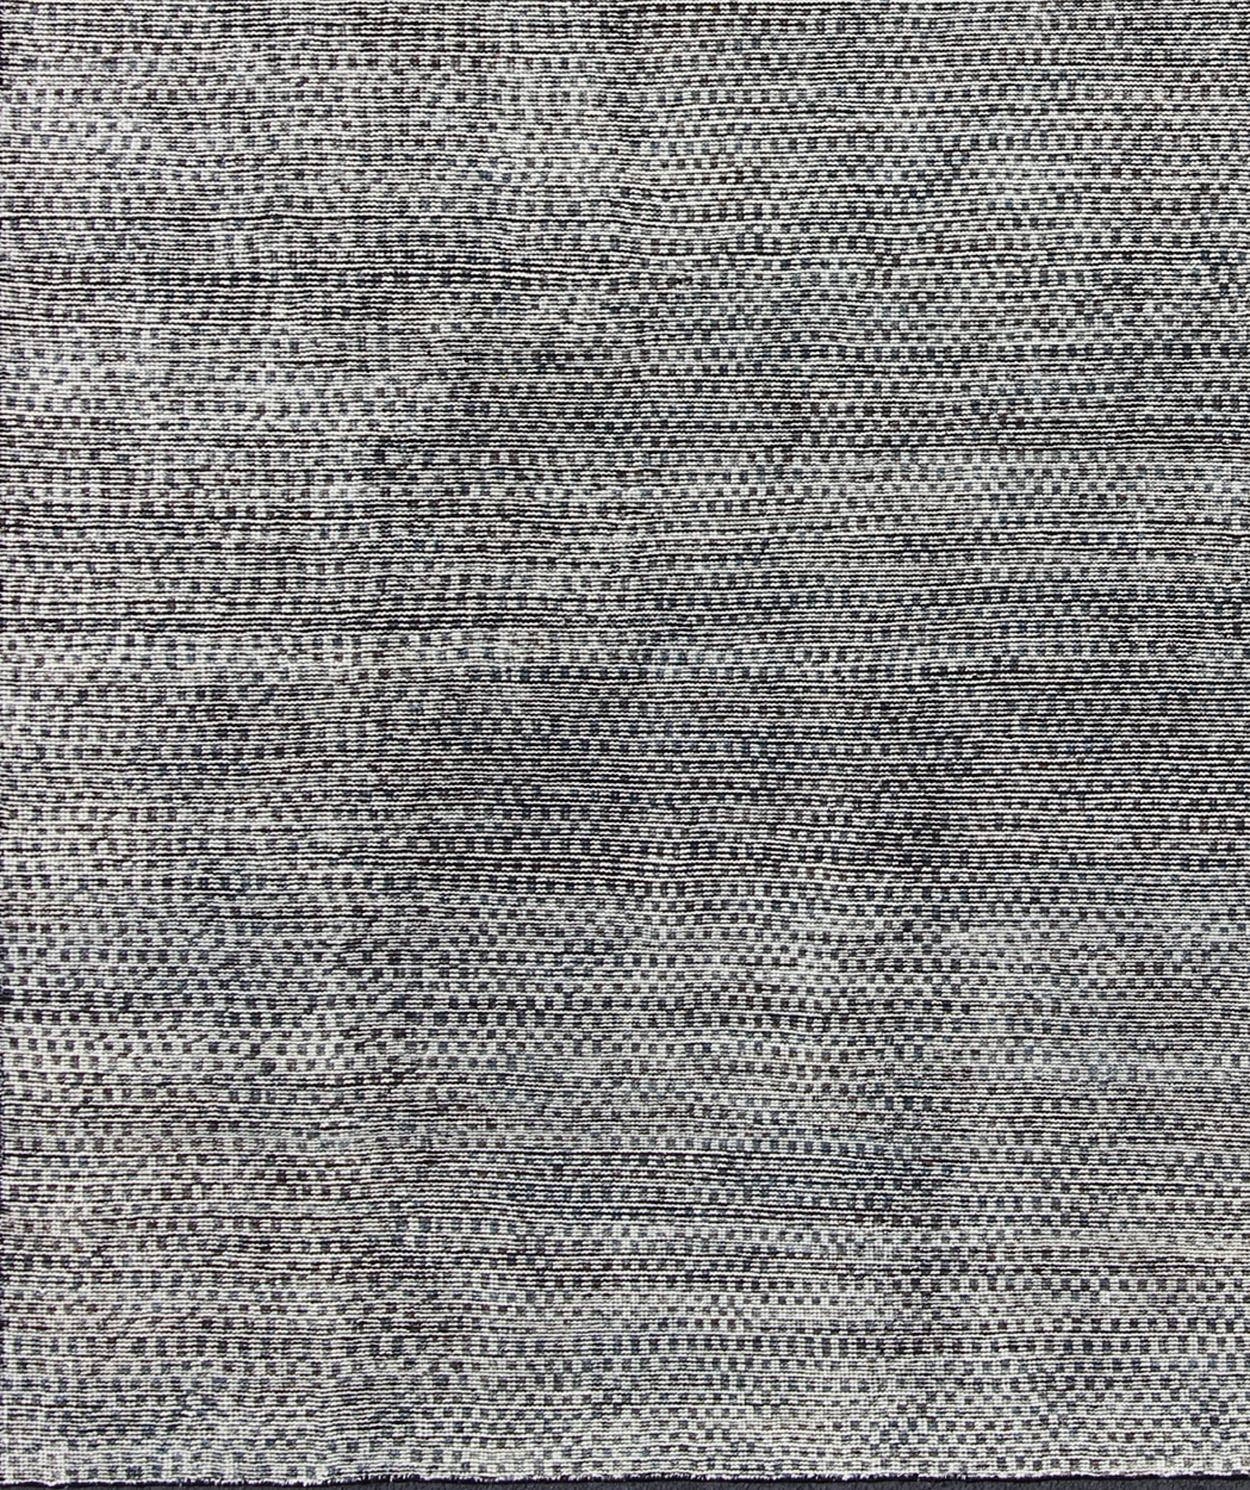 Shades of gray, white and charcoal in this modern design distressed rug. Keivan Woven Arts / rug/khn-506-tr-577, country of origin  / Scandinavian Modern Piled distressed Rug.
Measures: 9' x 12'.
This rug gets inspirations from abstract and modern